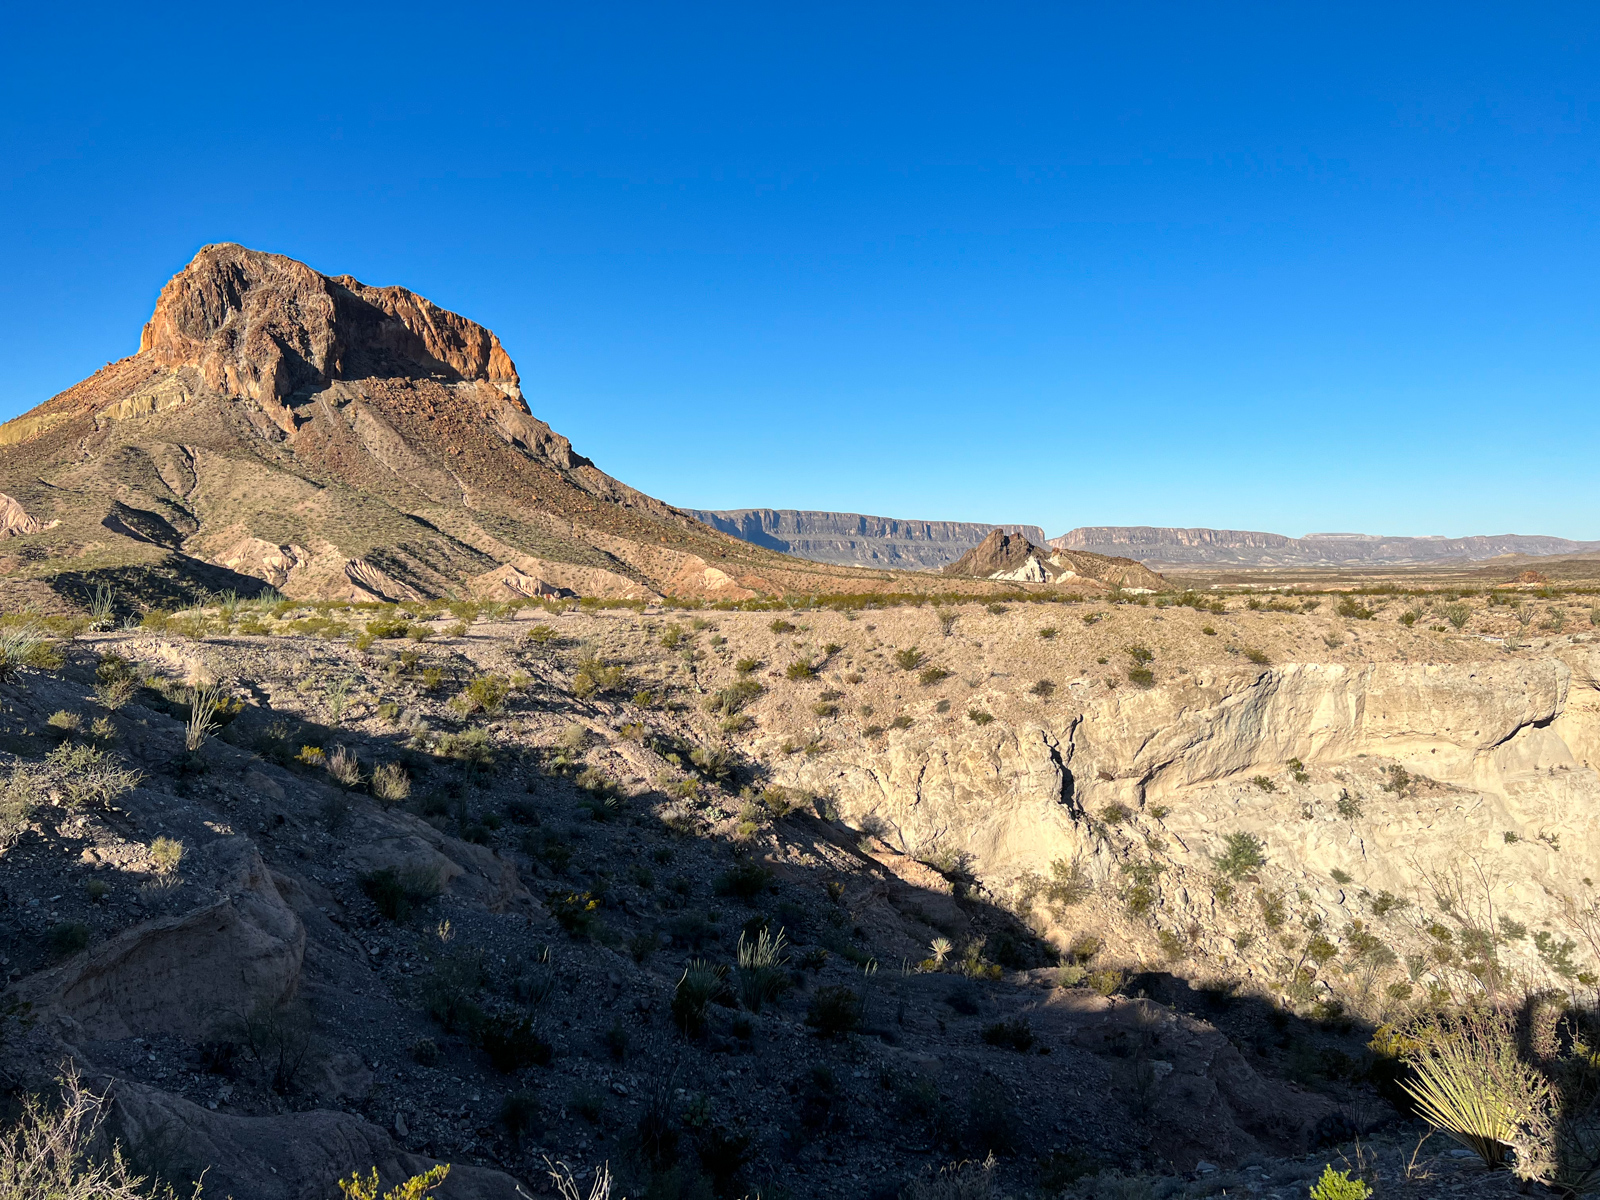 View from Tuff Canyon Overlook on the Ross Maxwell Scenic Drive. The Santa Elena Canyon is visible in the distance (center right).